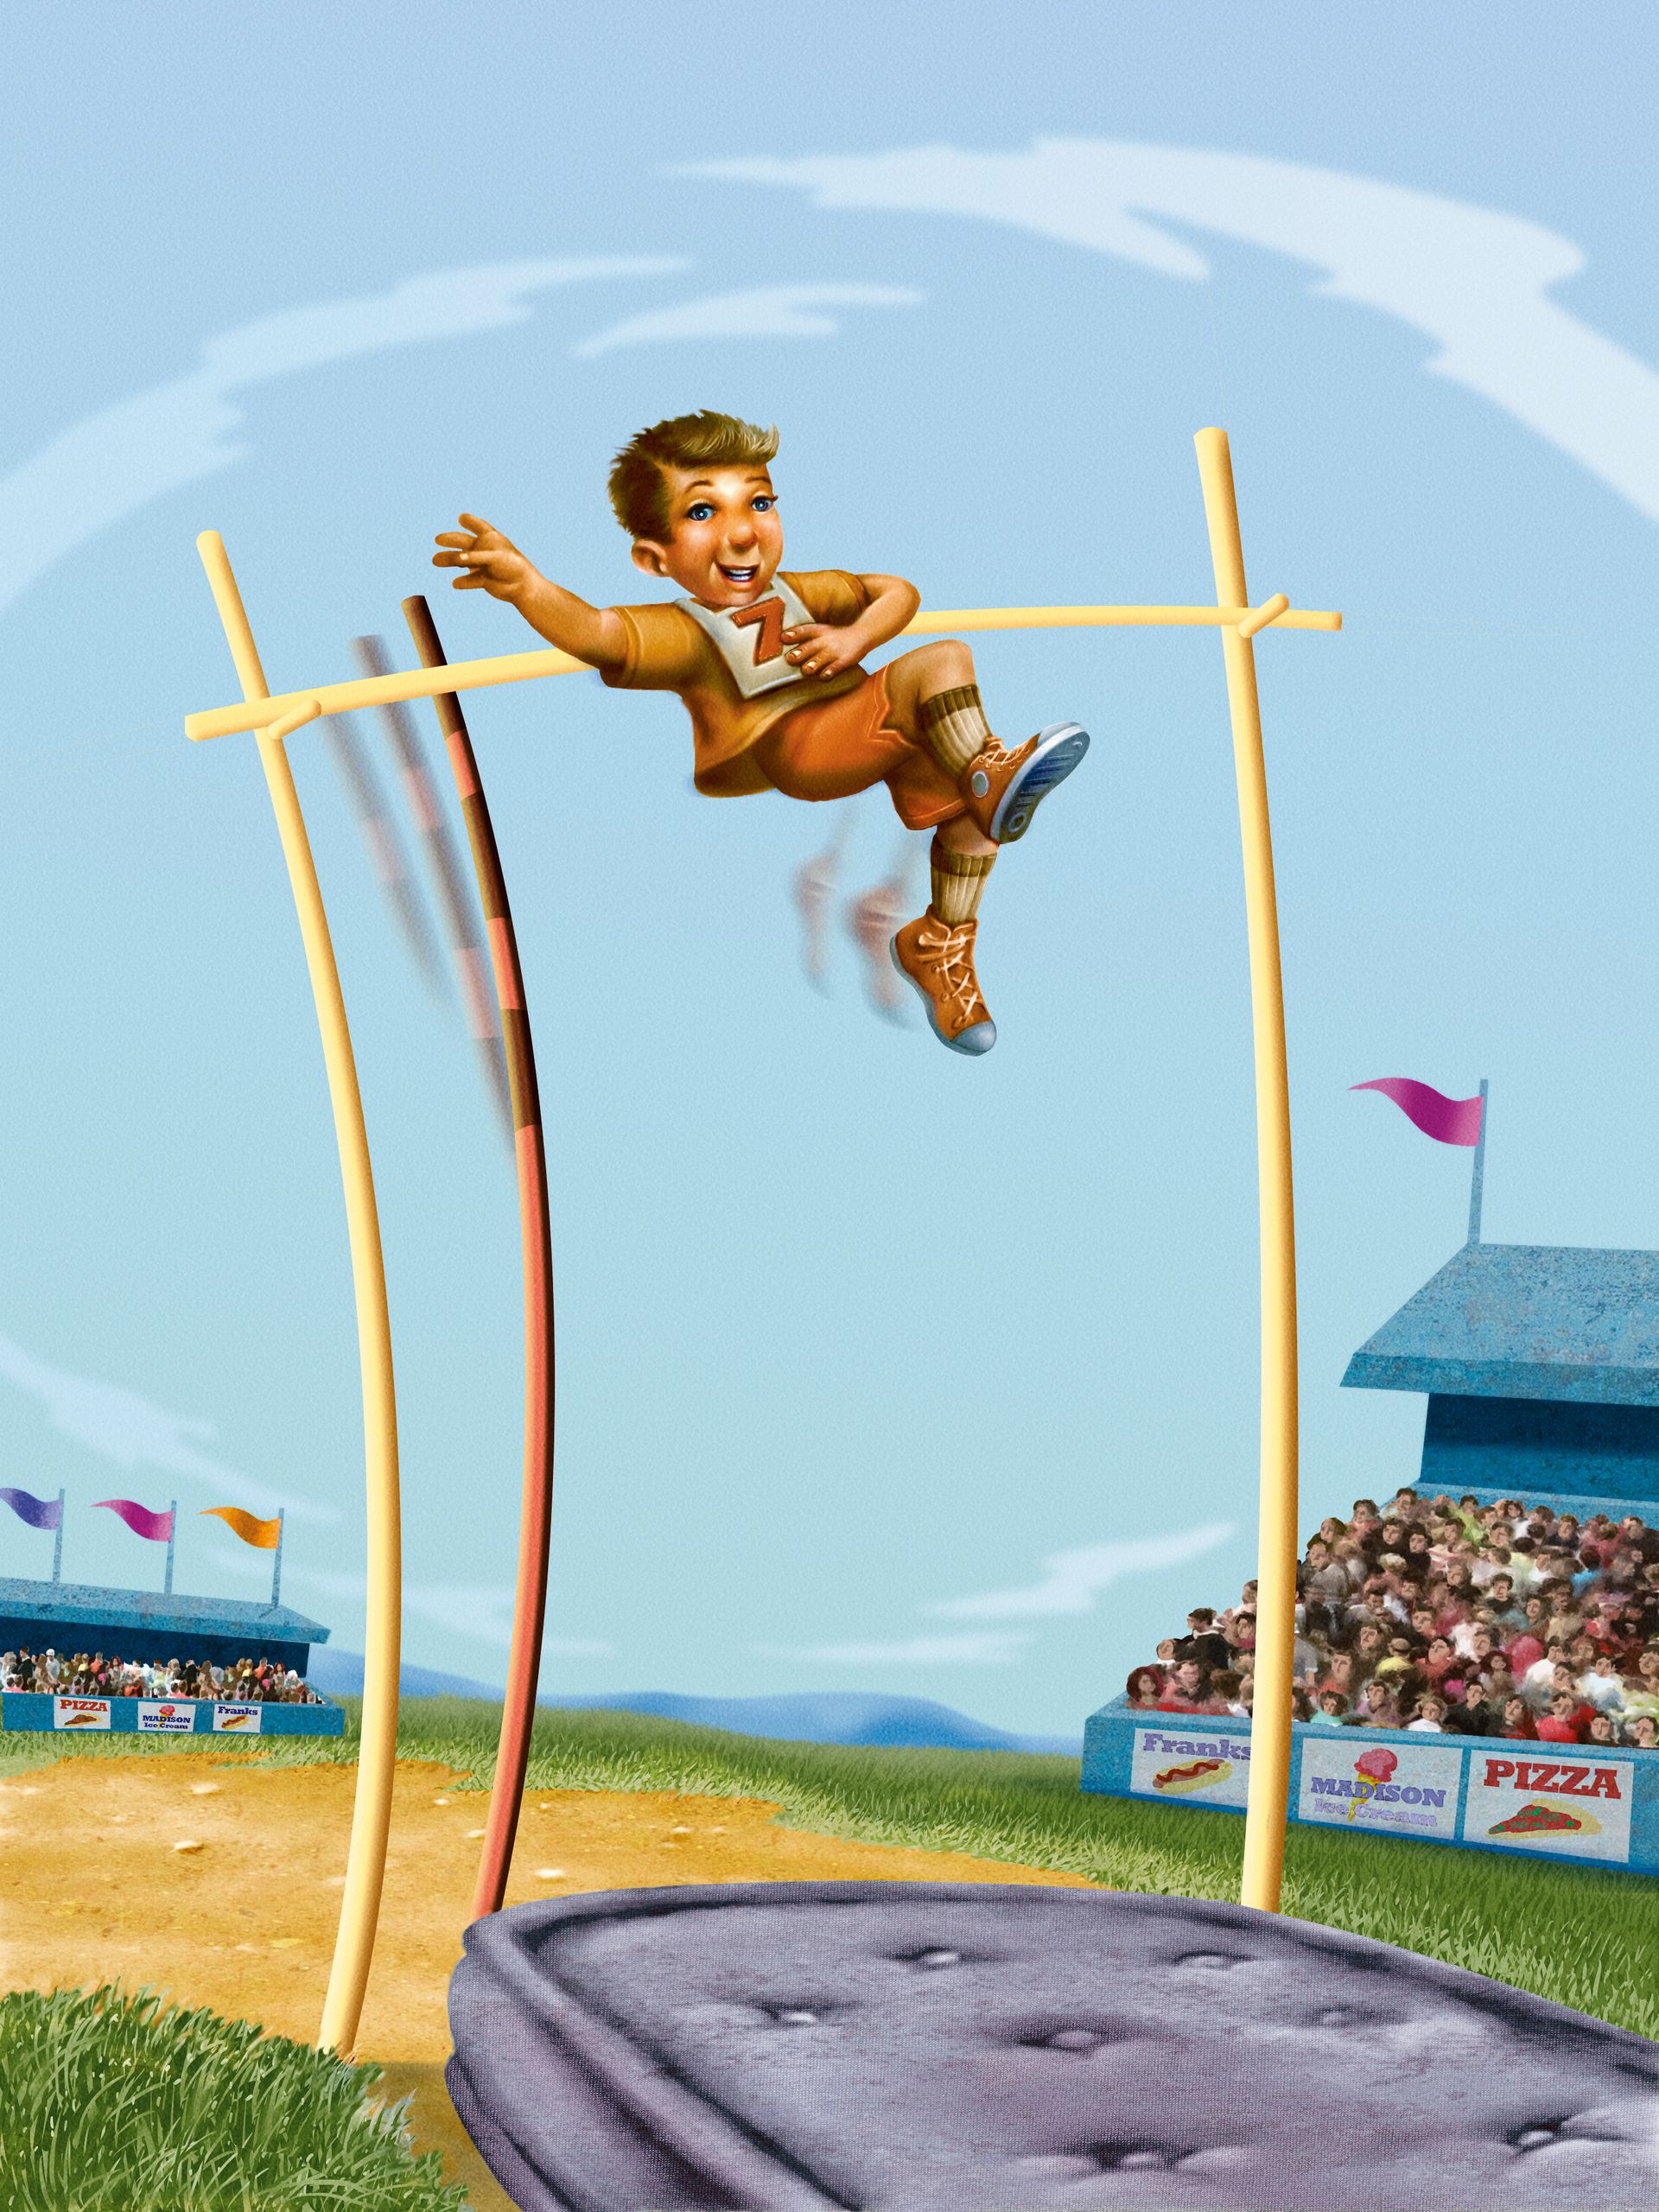 A boy jumps over a pole vault in front of a stadium full of people.